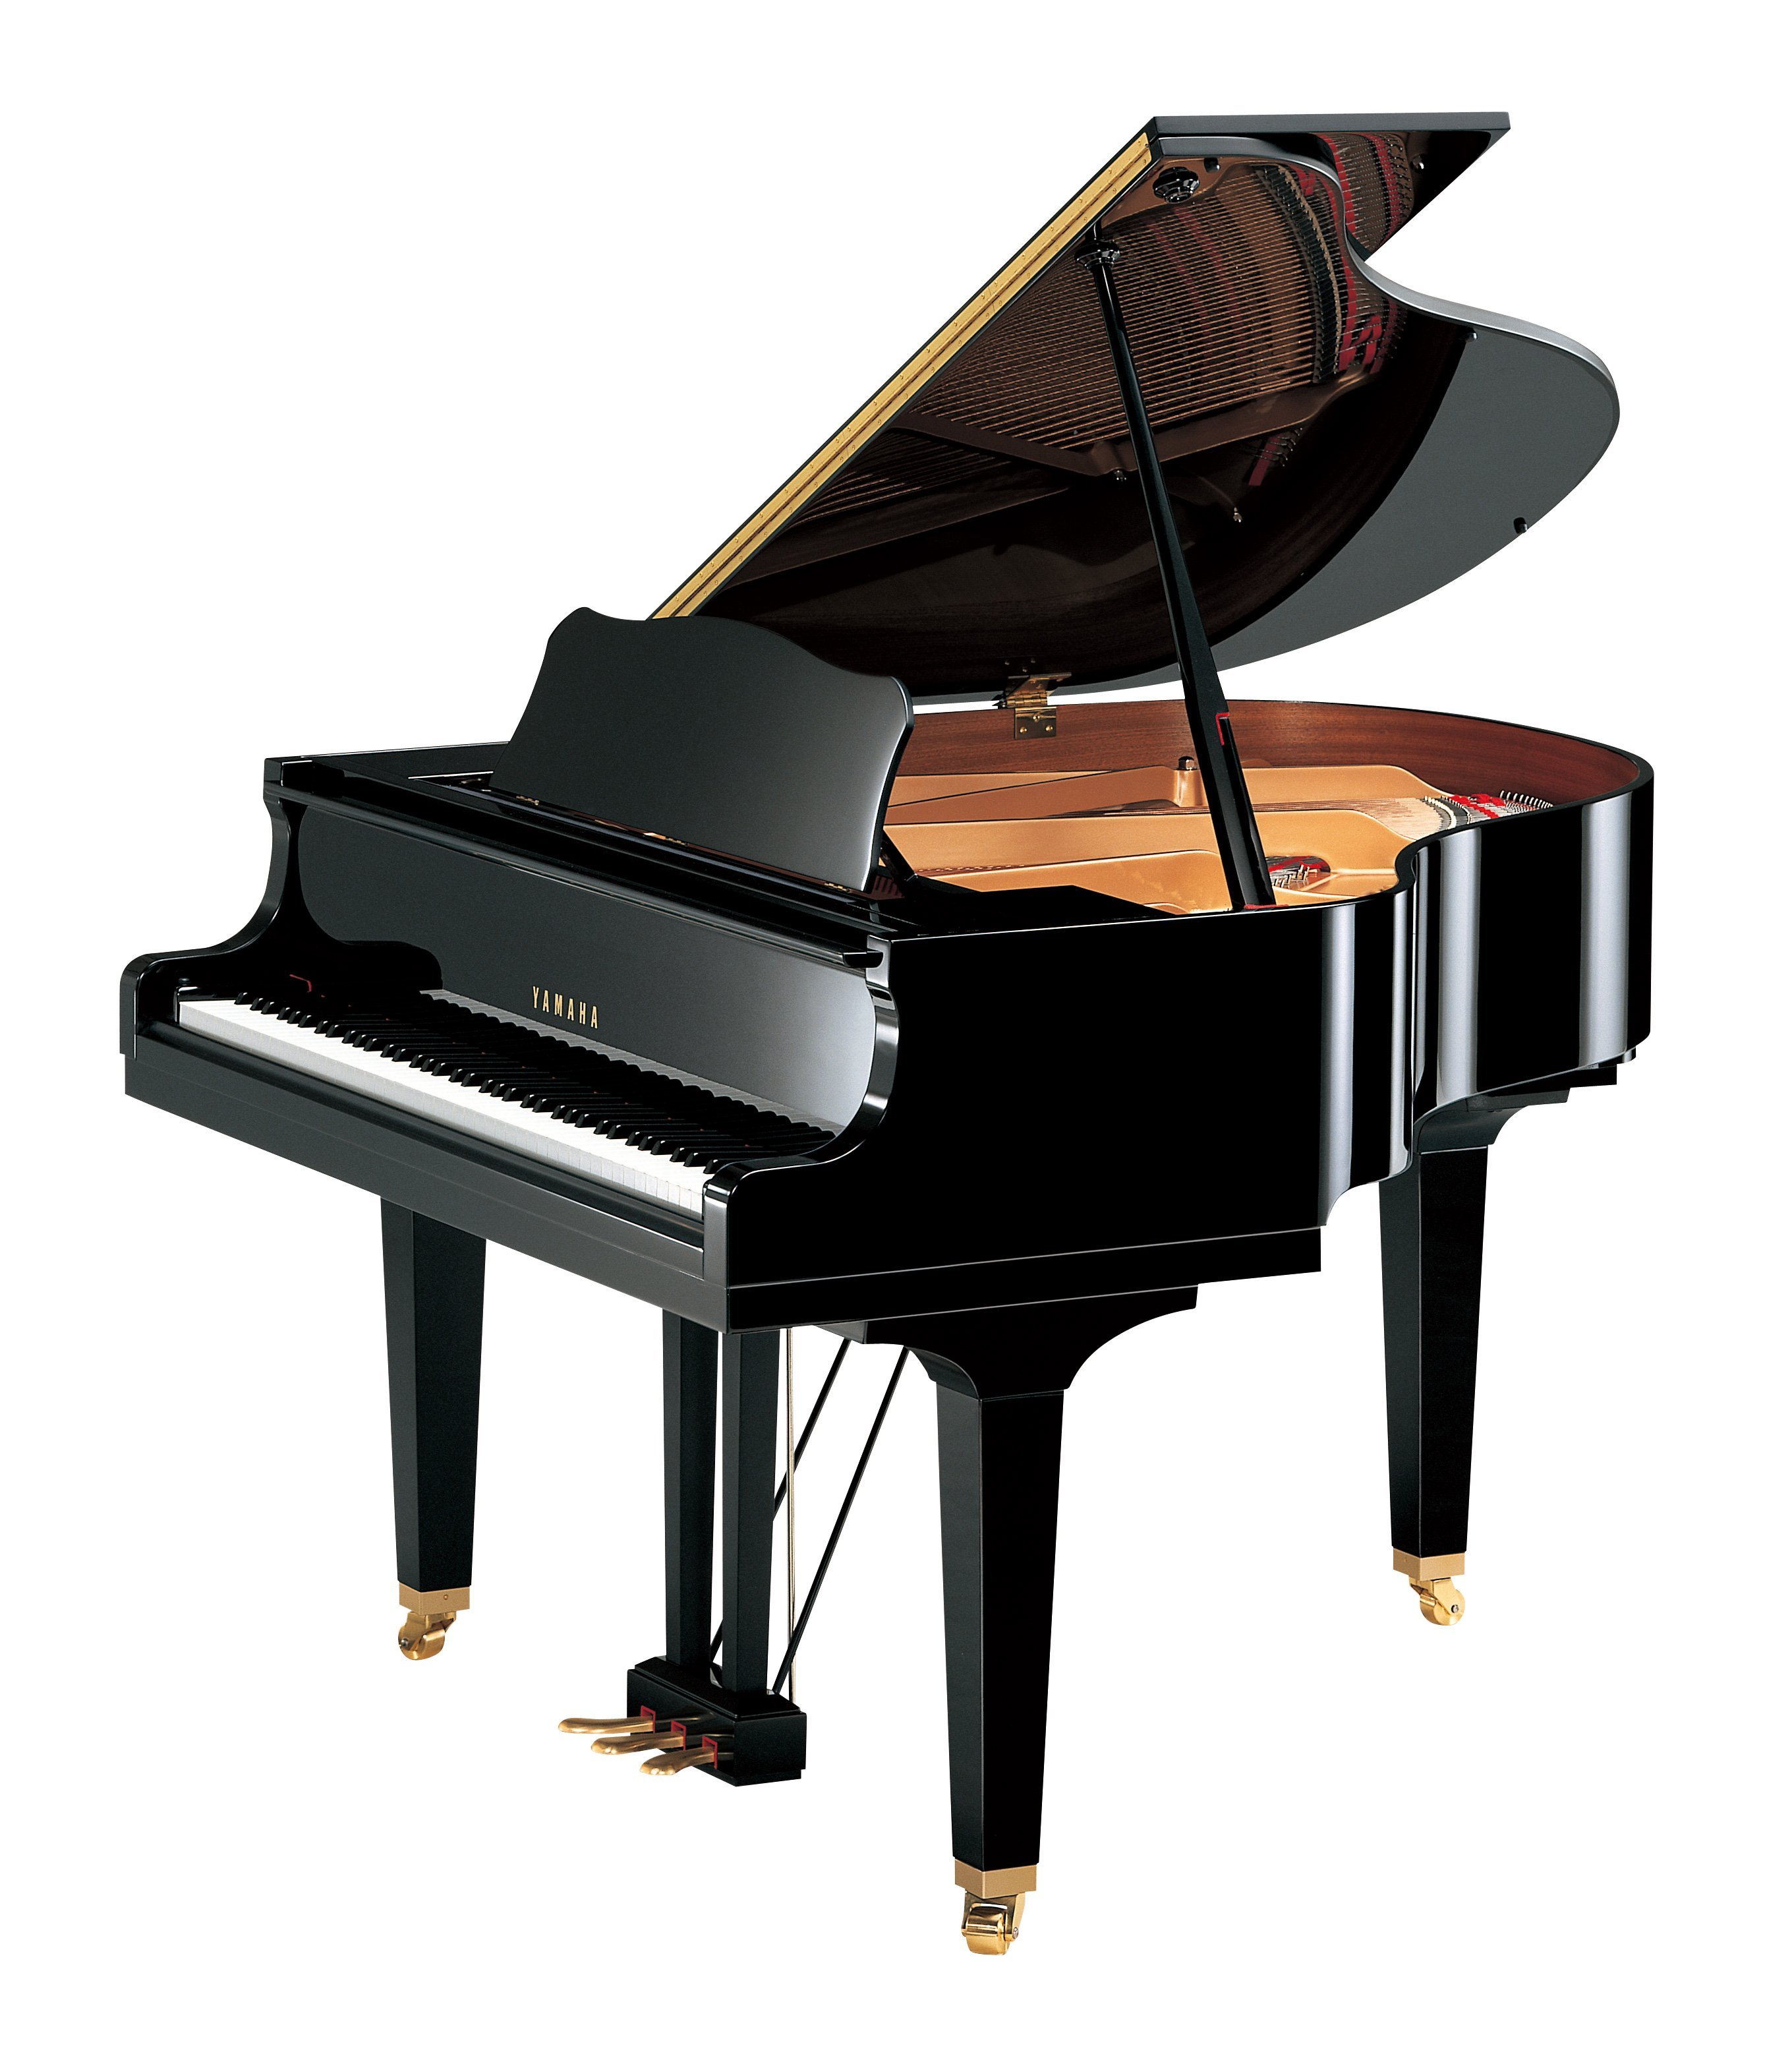 GB1K - Overview - Grand Pianos - Pianos - Musical Instruments ...